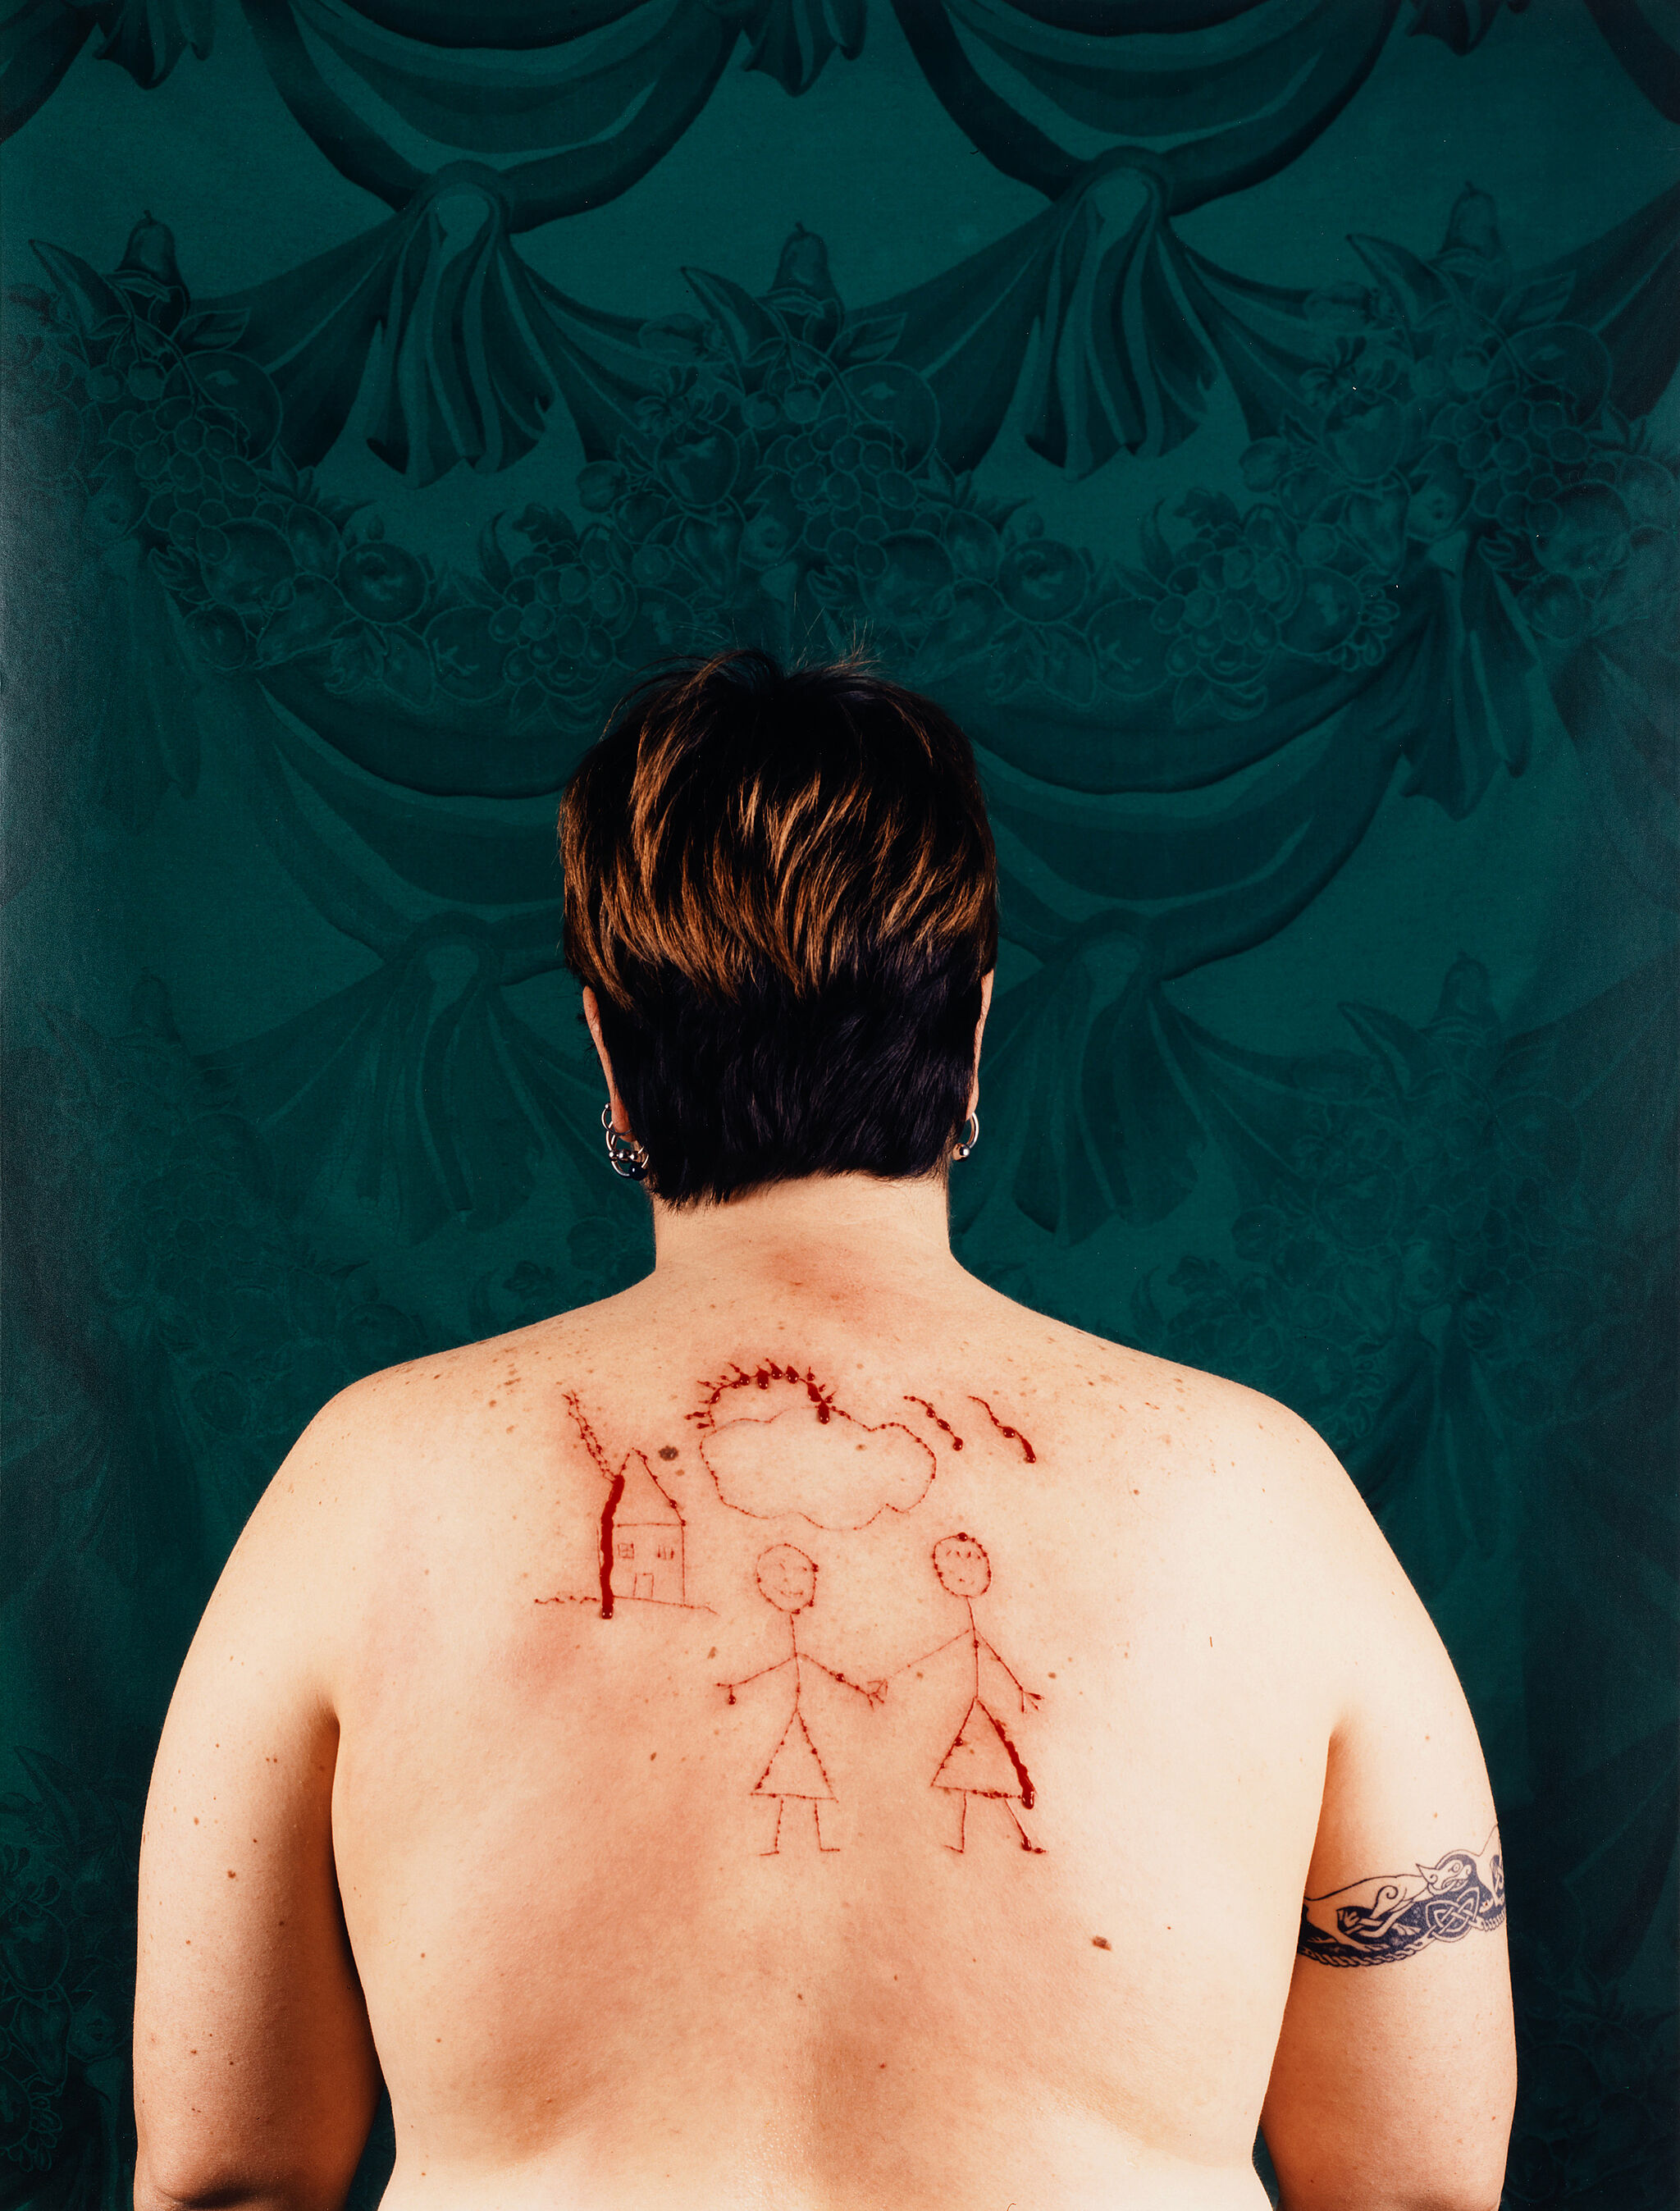 A woman's back with a drawing in blood.